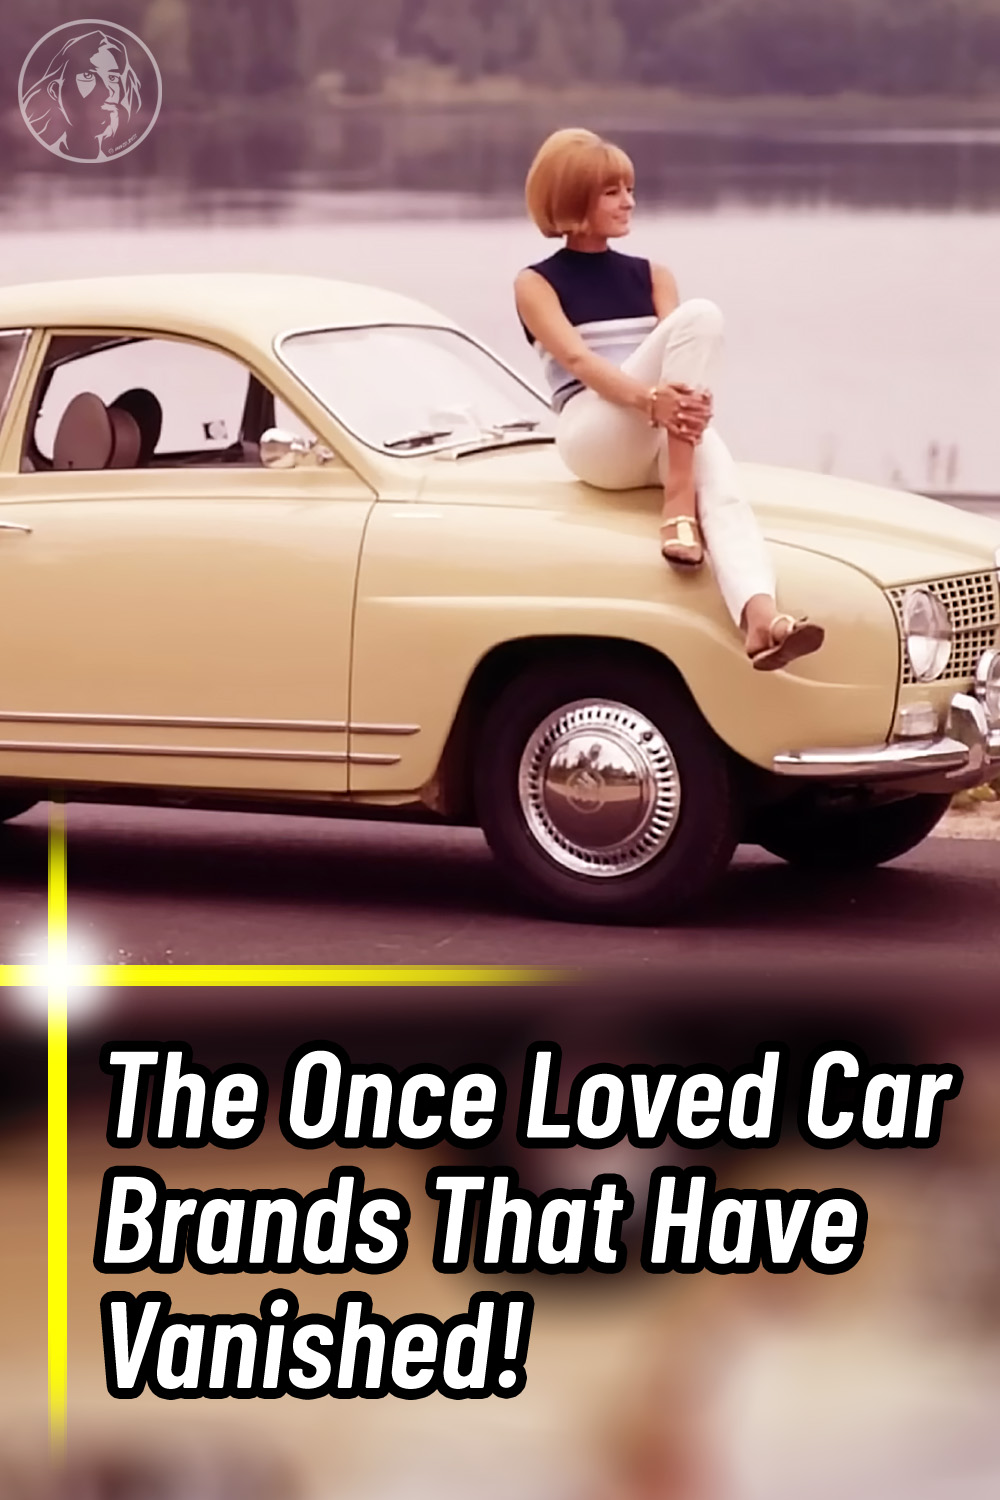 The Once Loved Car Brands That Have Vanished!